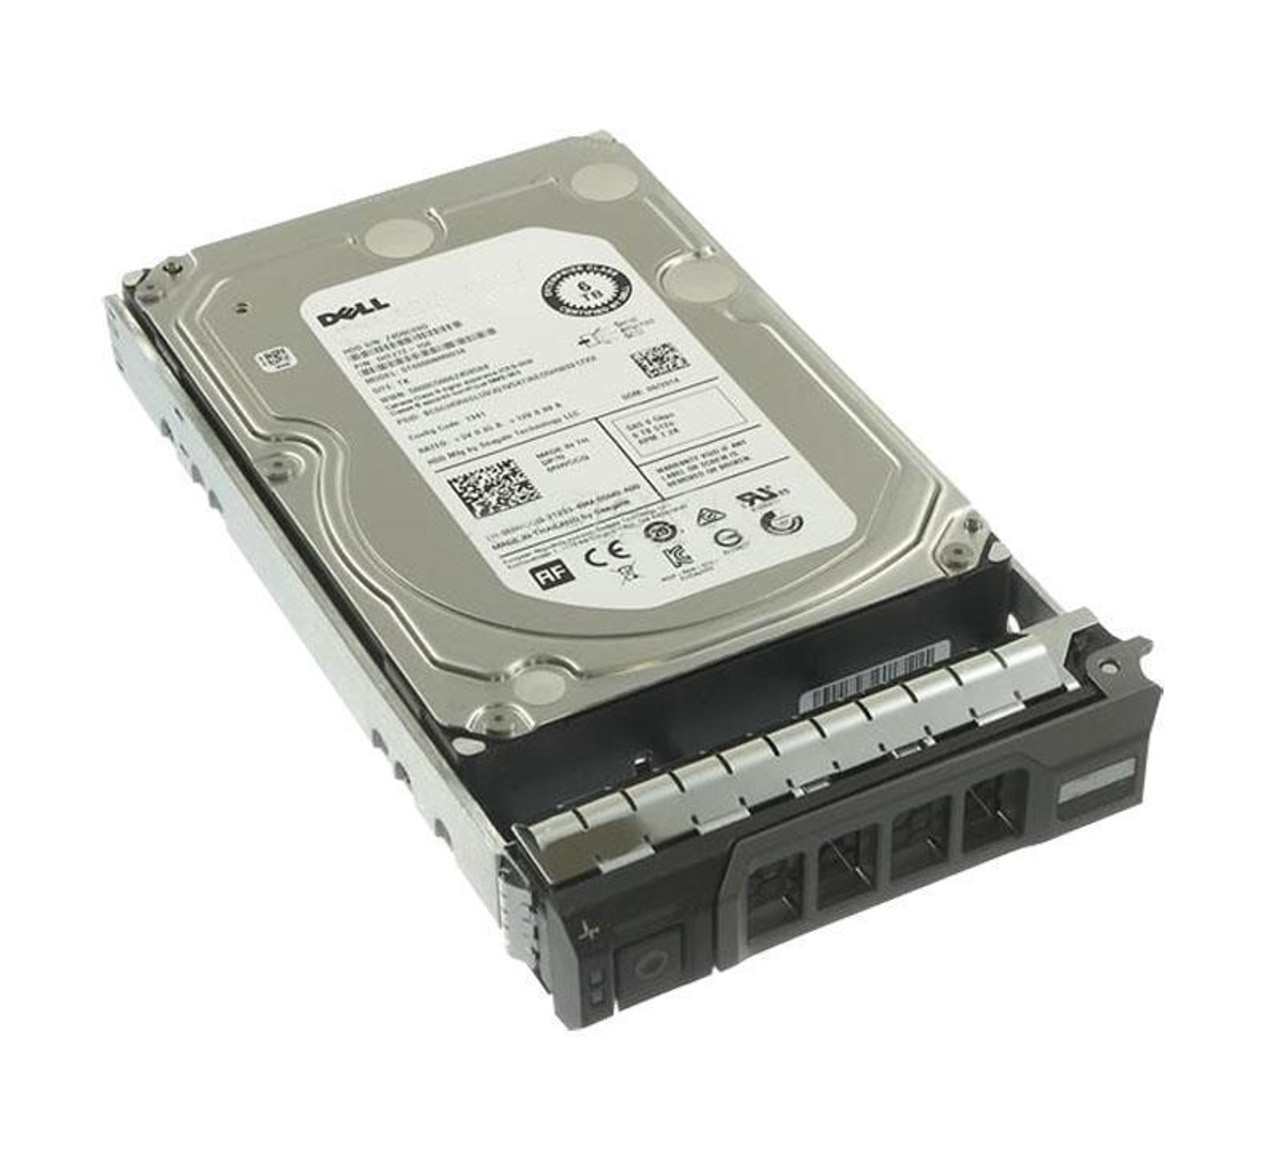 400-ASOK Dell 6TB 7200RPM SAS 12Gbps NearLine (SED) 3.5-inch Internal Hard Drive (24-Pack)